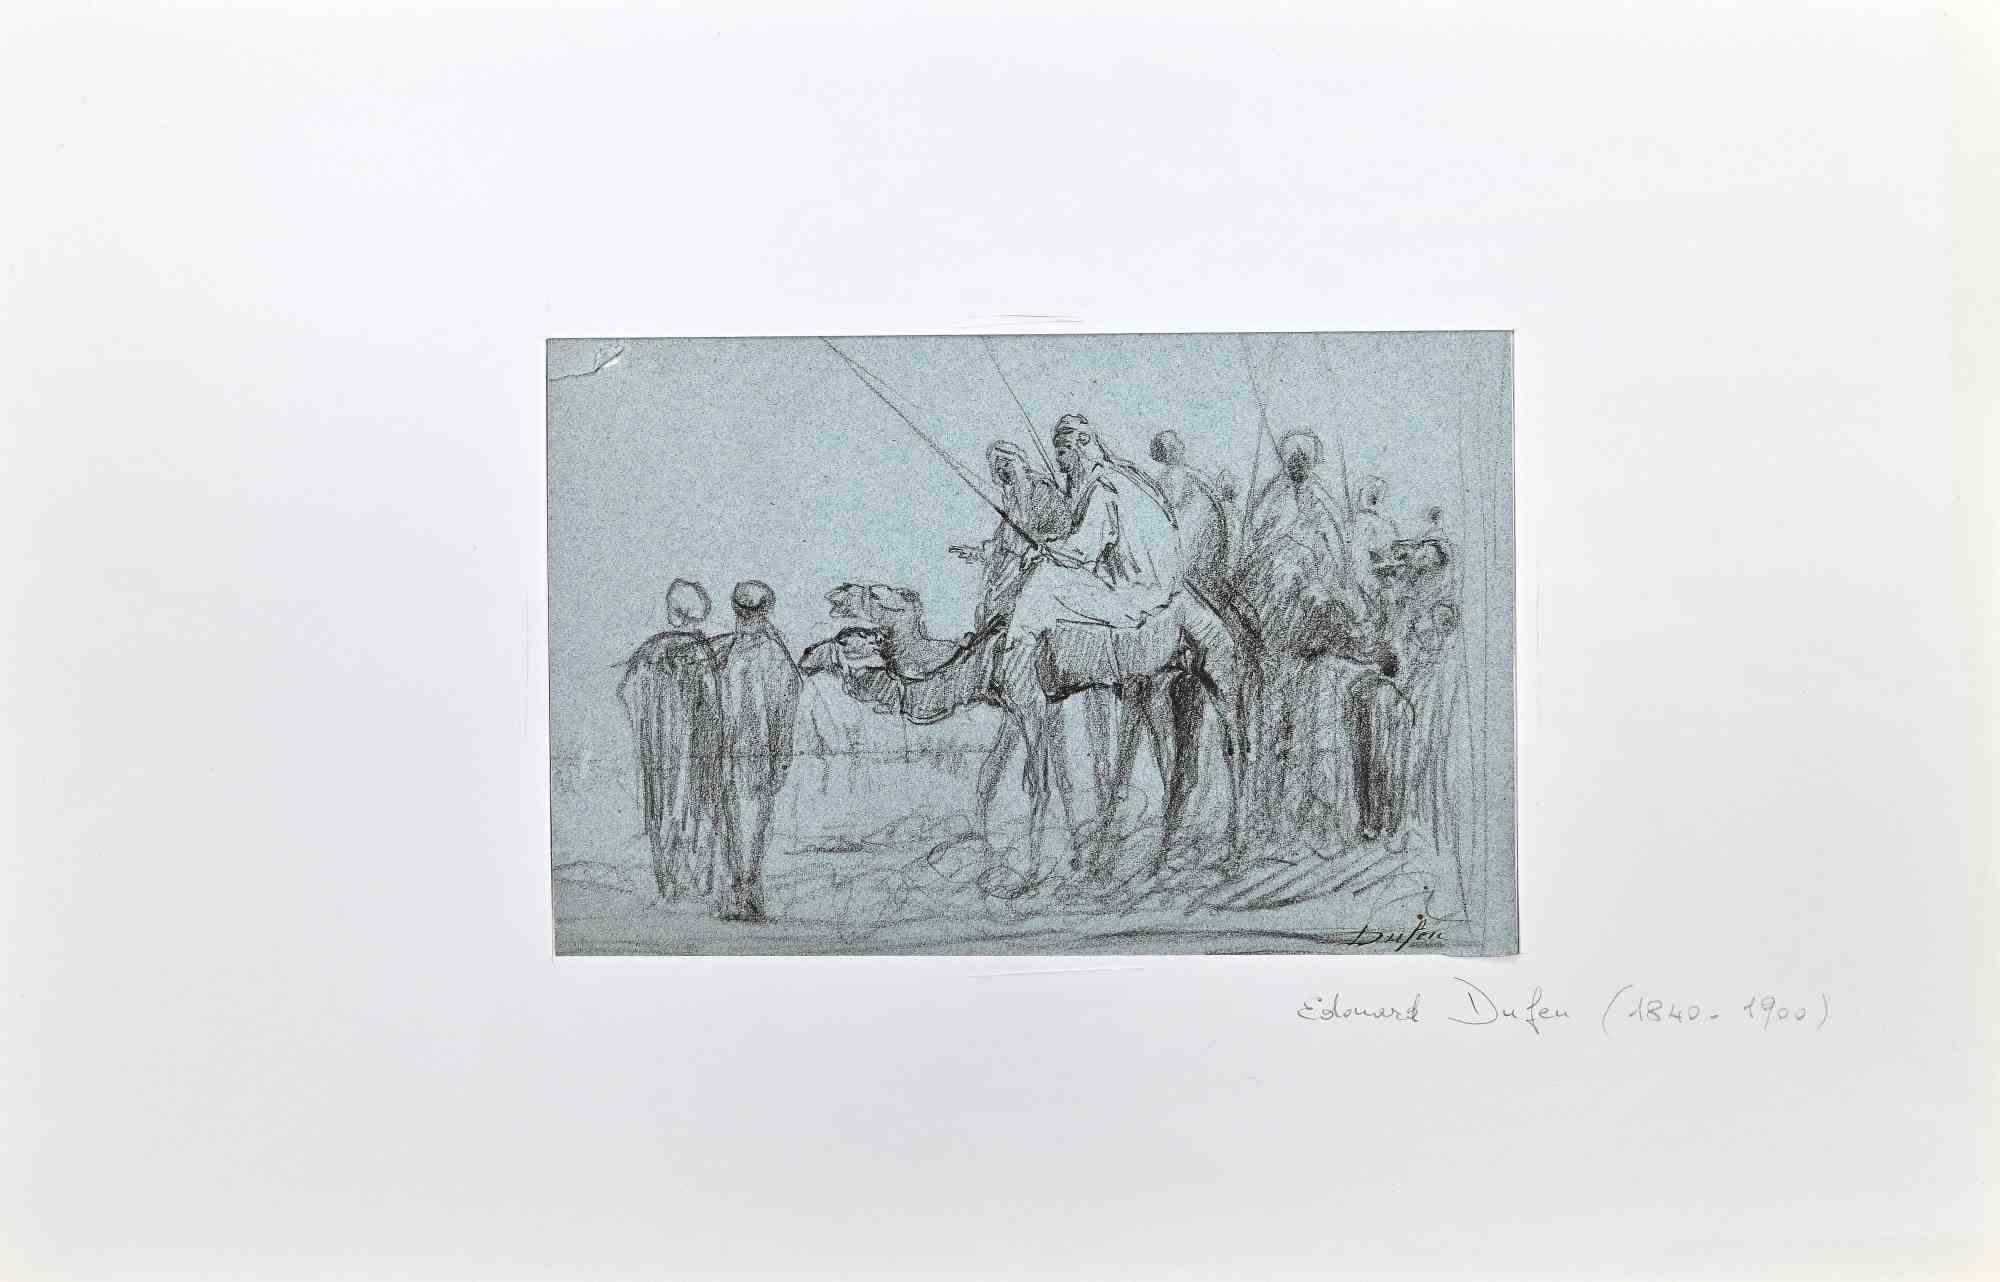 Bedouis With Camels is an Original Orientalist Pencil Drawing realized by Edouard Dufeu (1840-1900).

Good condition on a grey paper, included a white cardboard passpartout (50x32.5 cm).

Signature on the lower right corner.

Edouard Jacques Dufeu,